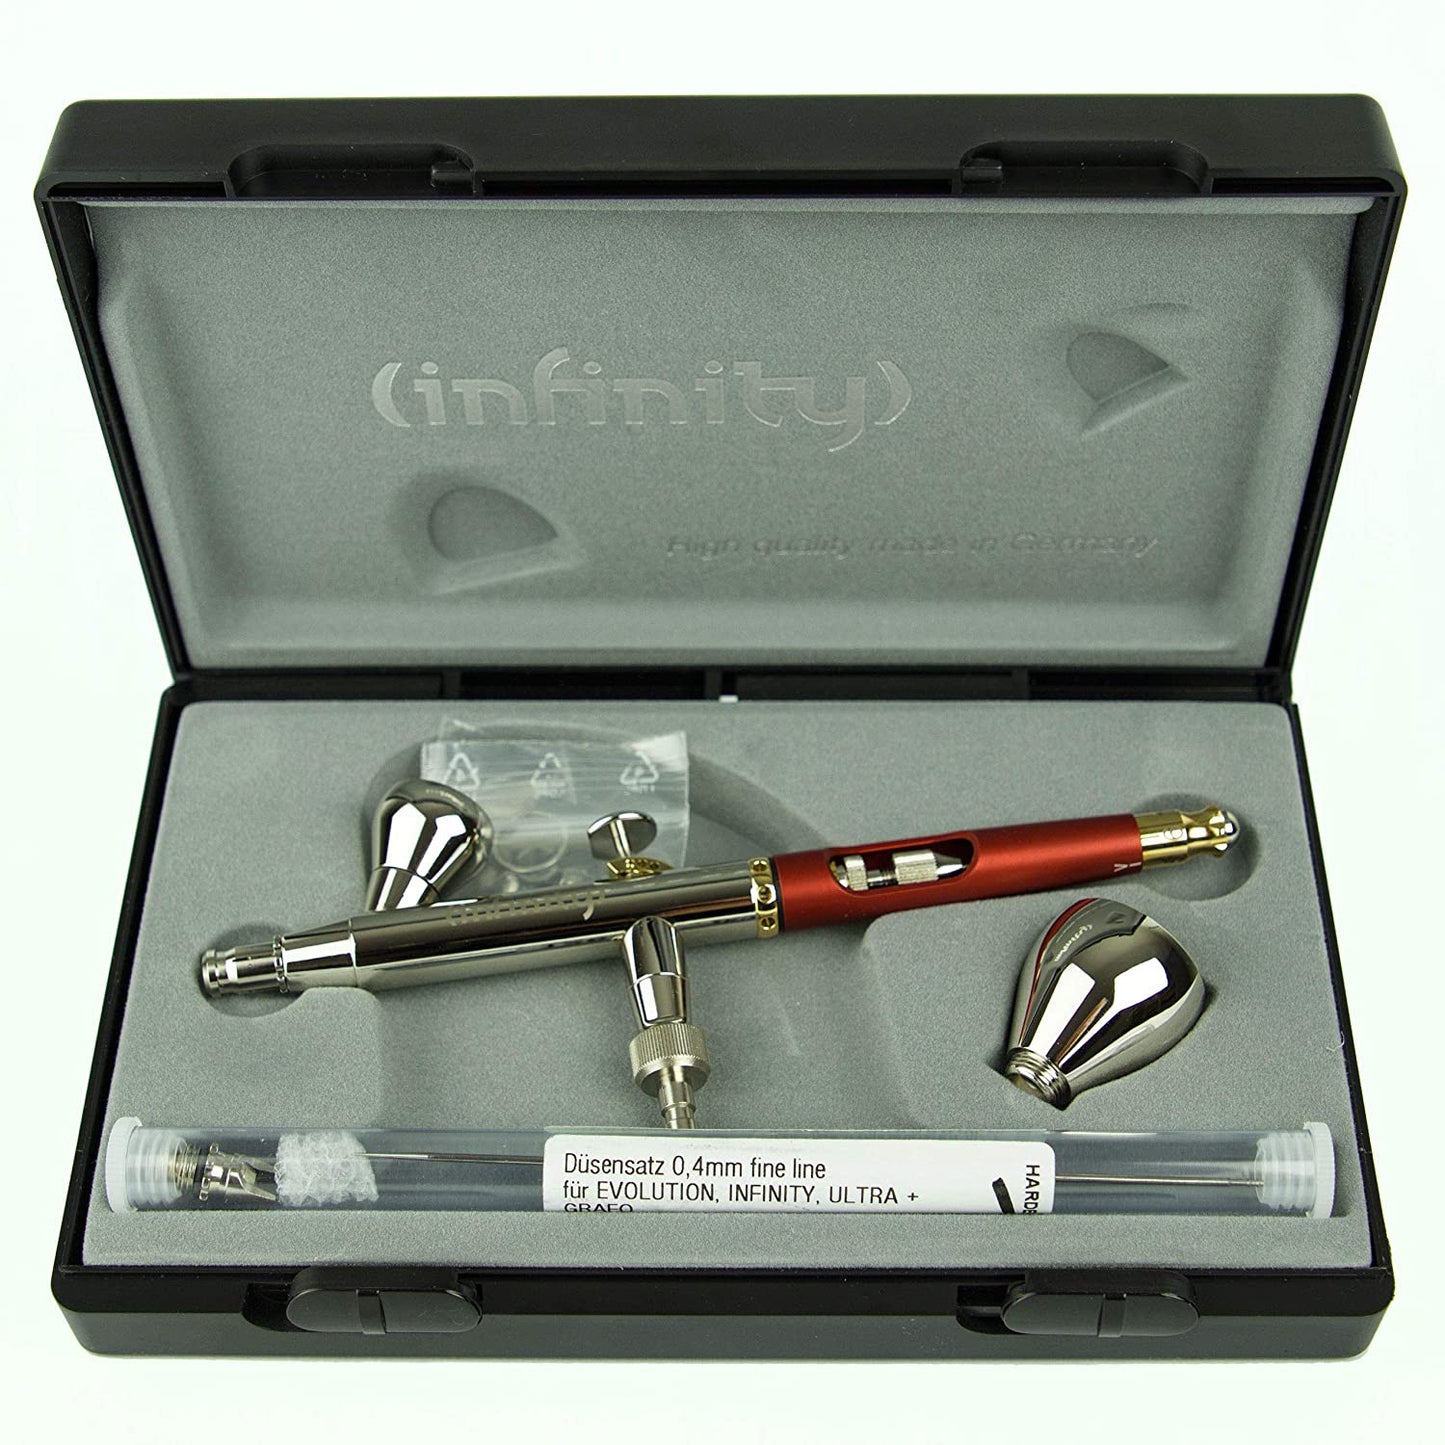 Harder & Steenbeck airbrush Infinity CR plus 2 in 1 (0.2 & 0.4mm nozzle) 126594